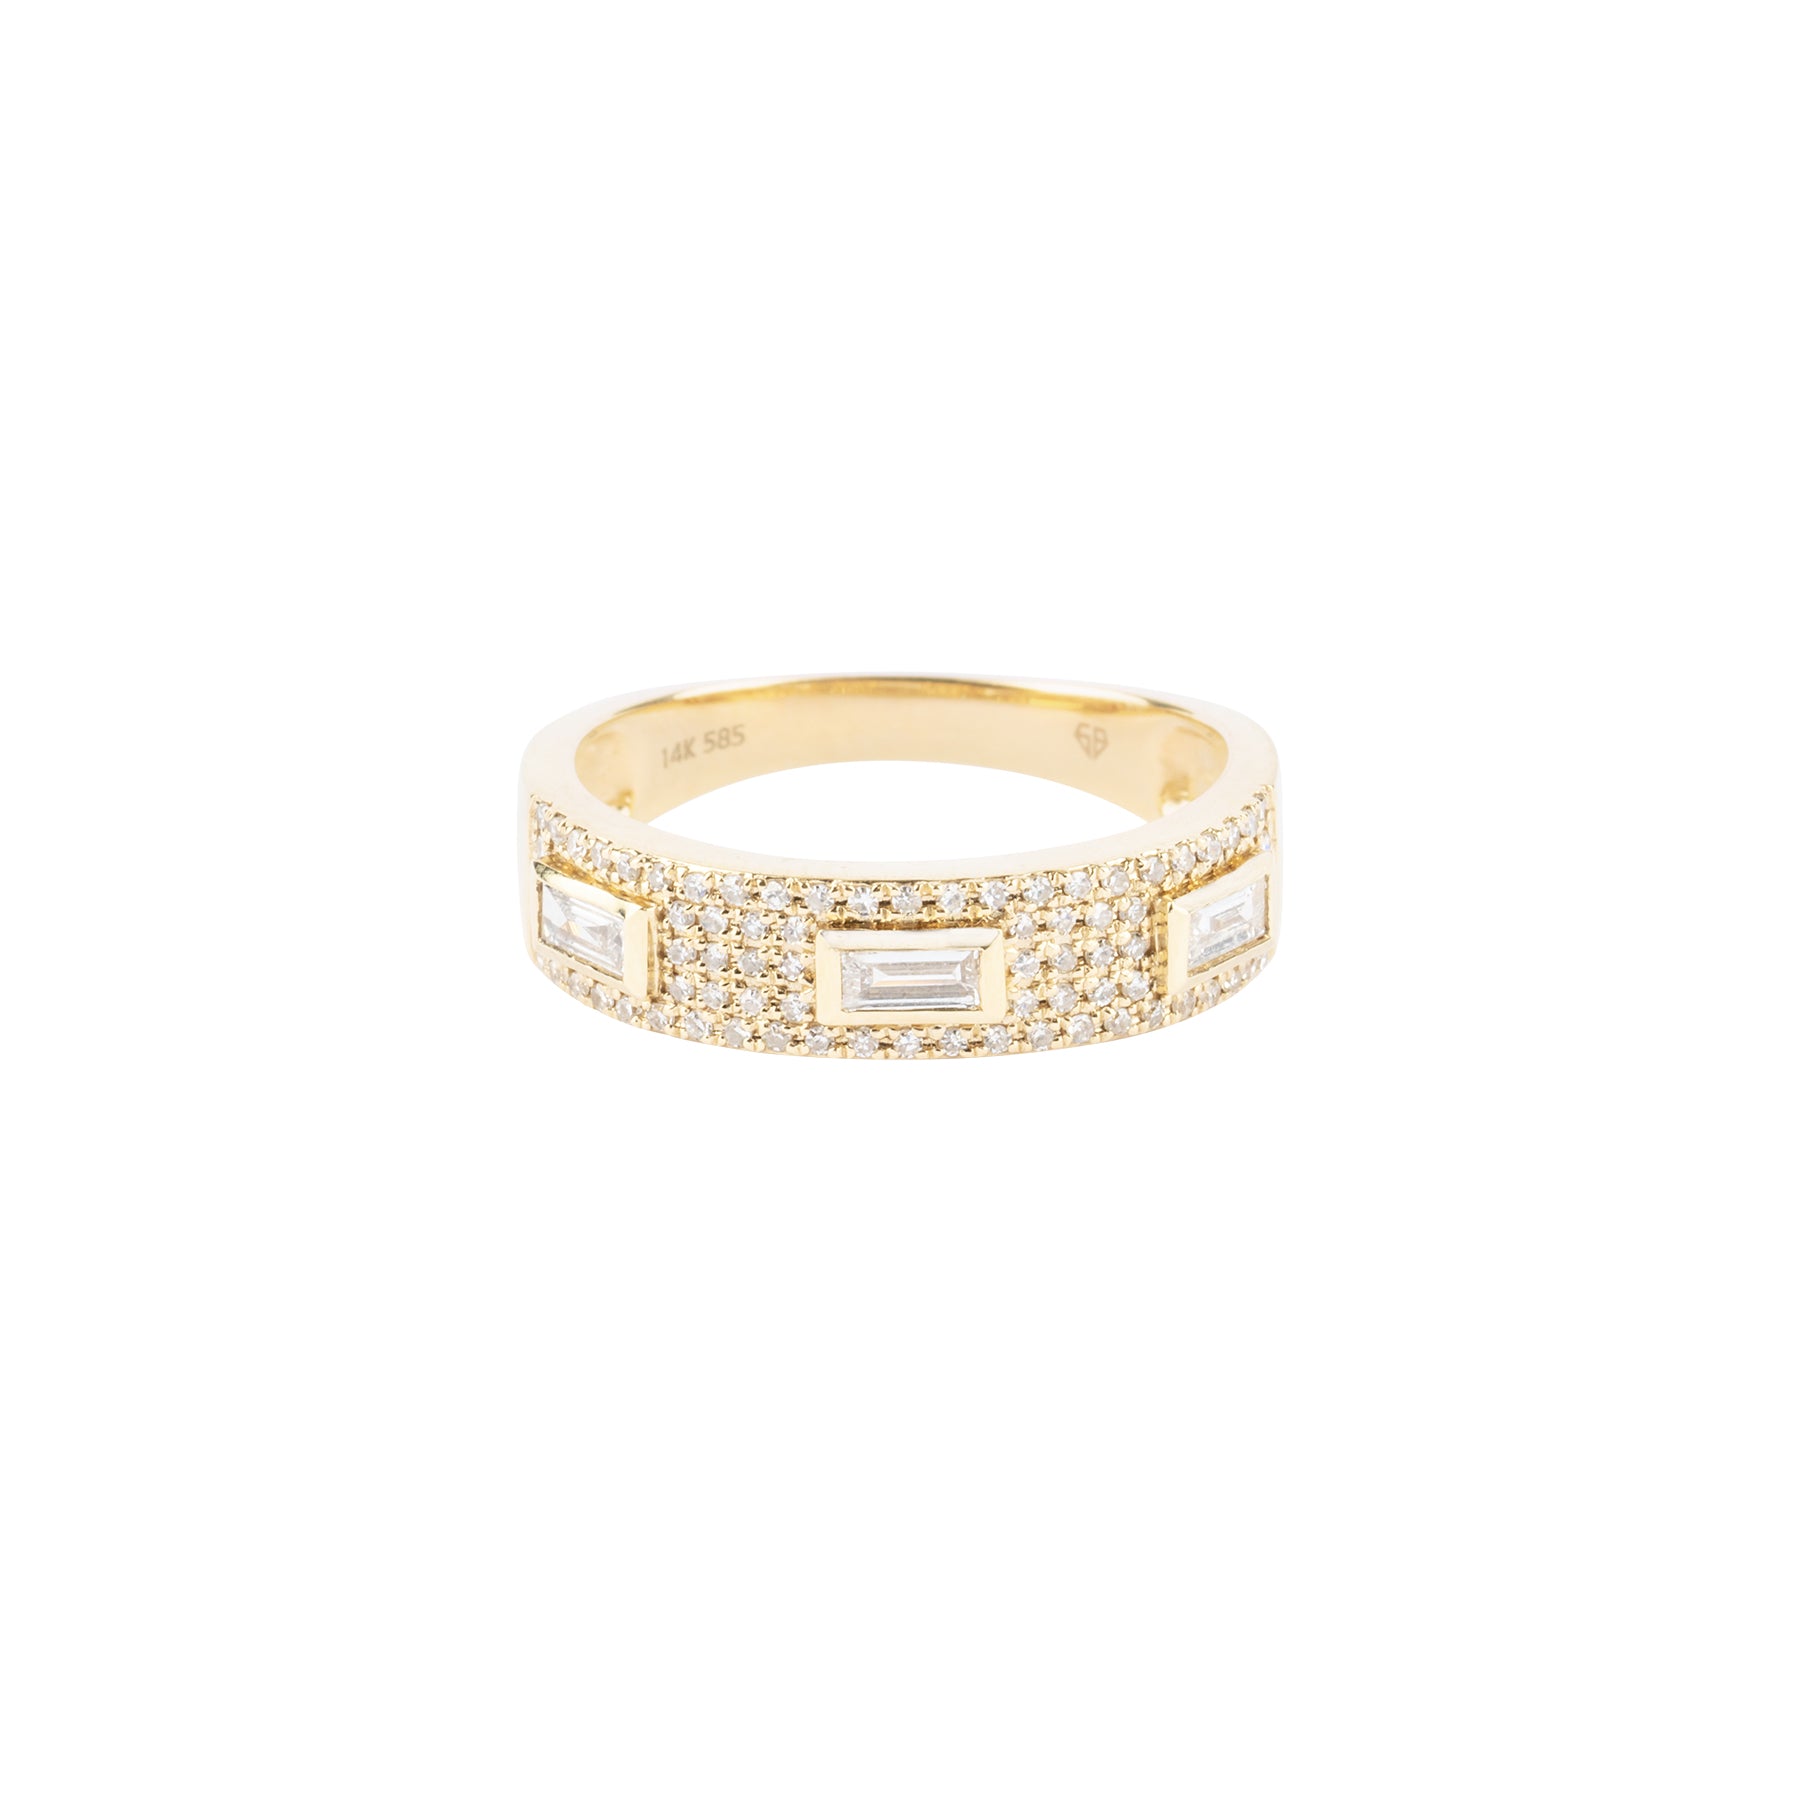 Pave Thick Diamond Band With Baguettes Ring - Nina Segal Jewelry